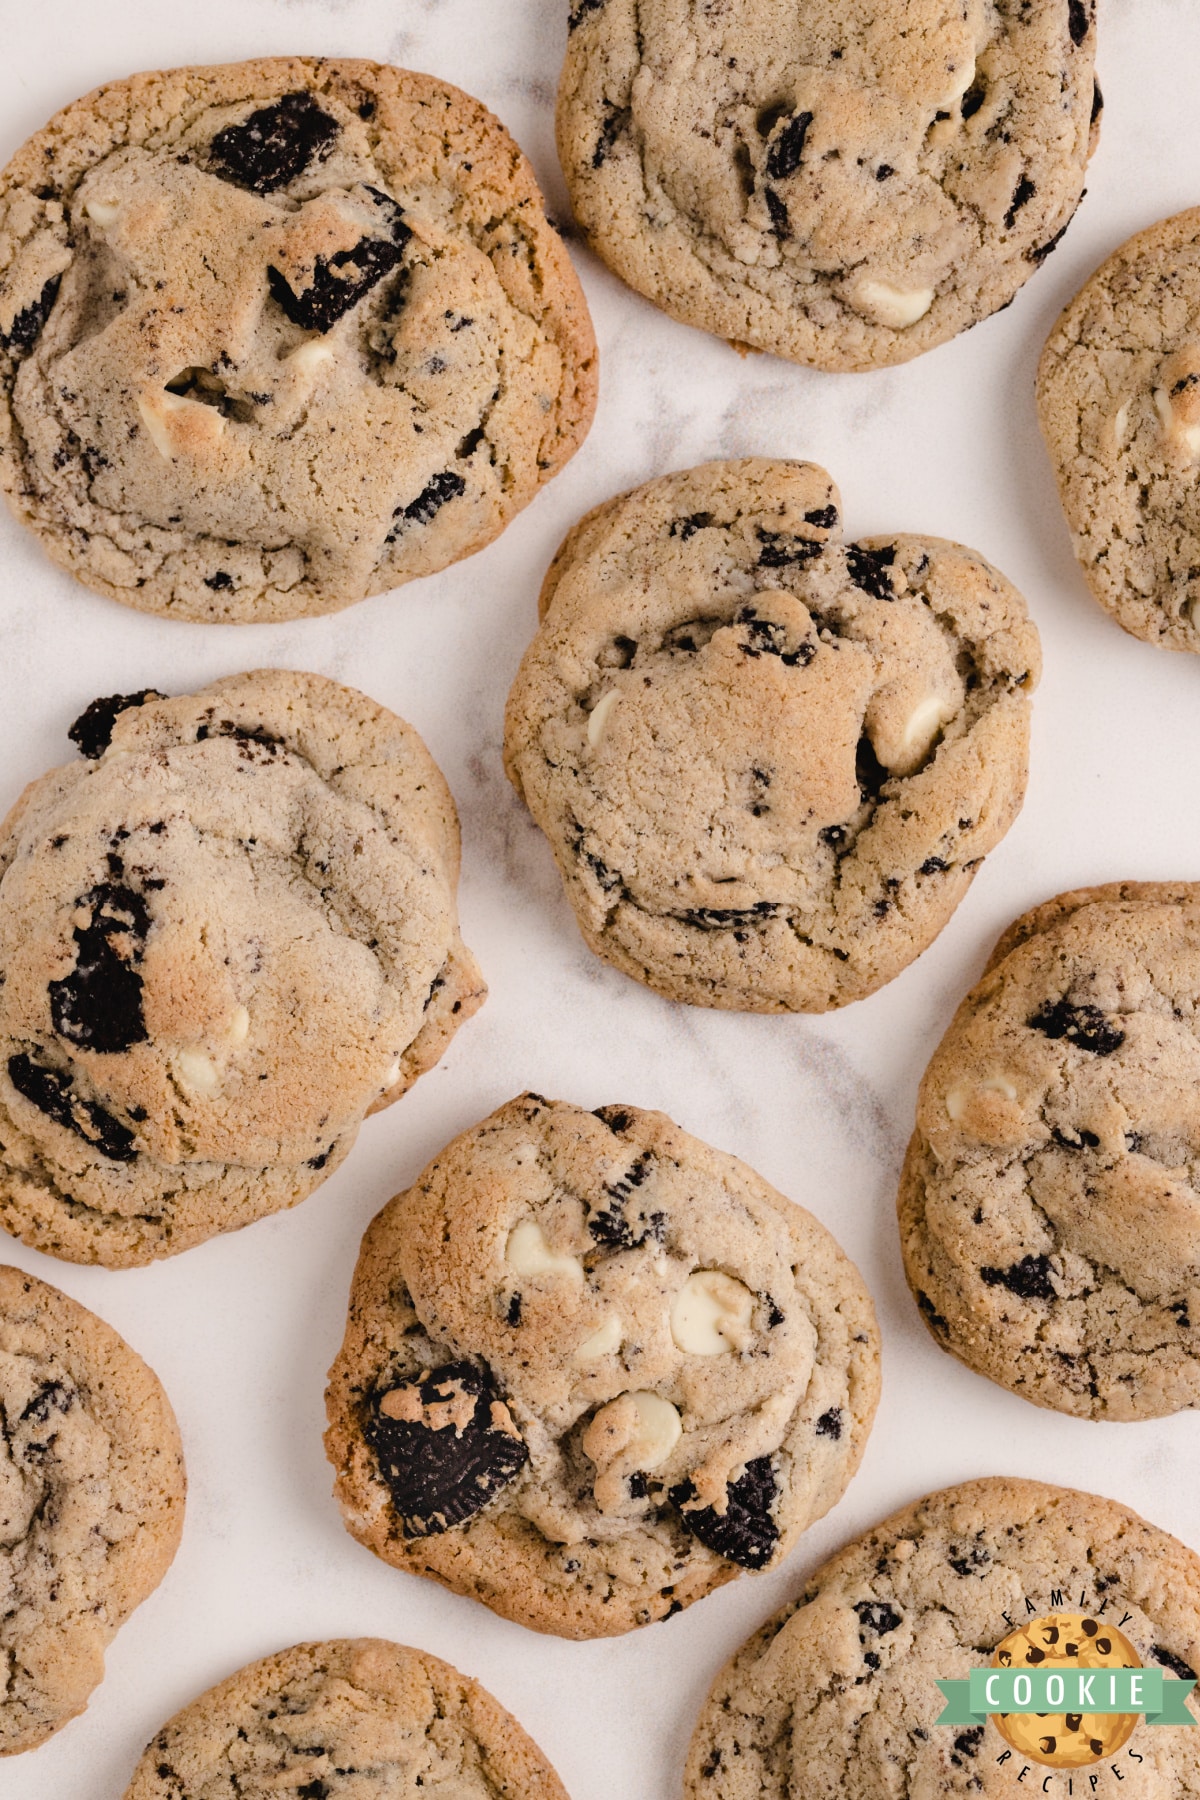 Cookies & Cream Cookies are made with Oreo pudding mix and crushed Oreo cookies. A deliciously soft and chewy cookie recipe that is sure to be a favorite!